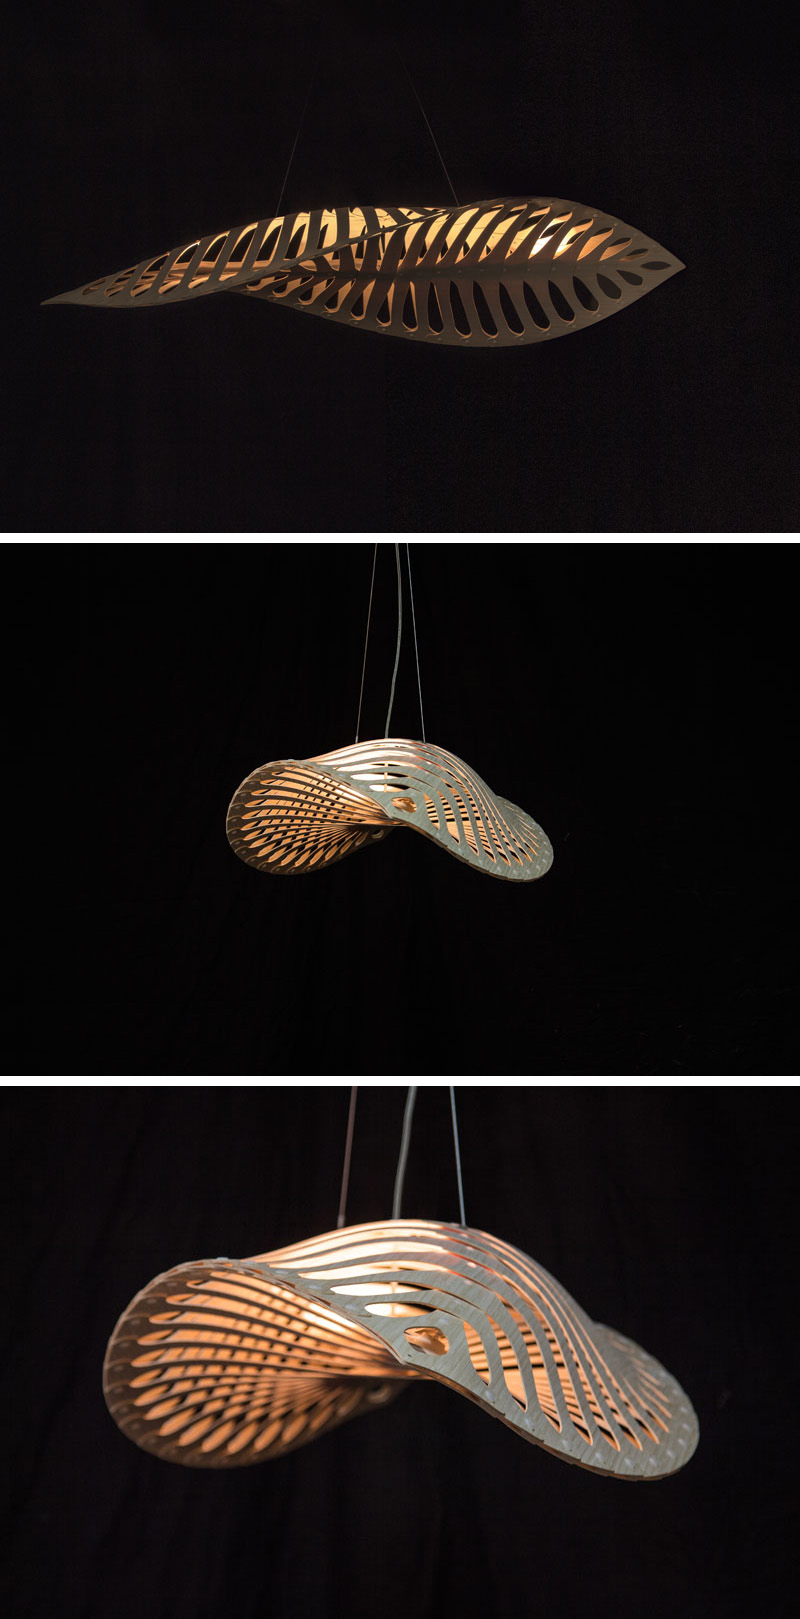 Inspired by the microscopic organisms living in our oceans, New Zealand-based designer David Trubridge has created Navicula - a modern and sculptural light fixture made from CNC cut bamboo plywood.